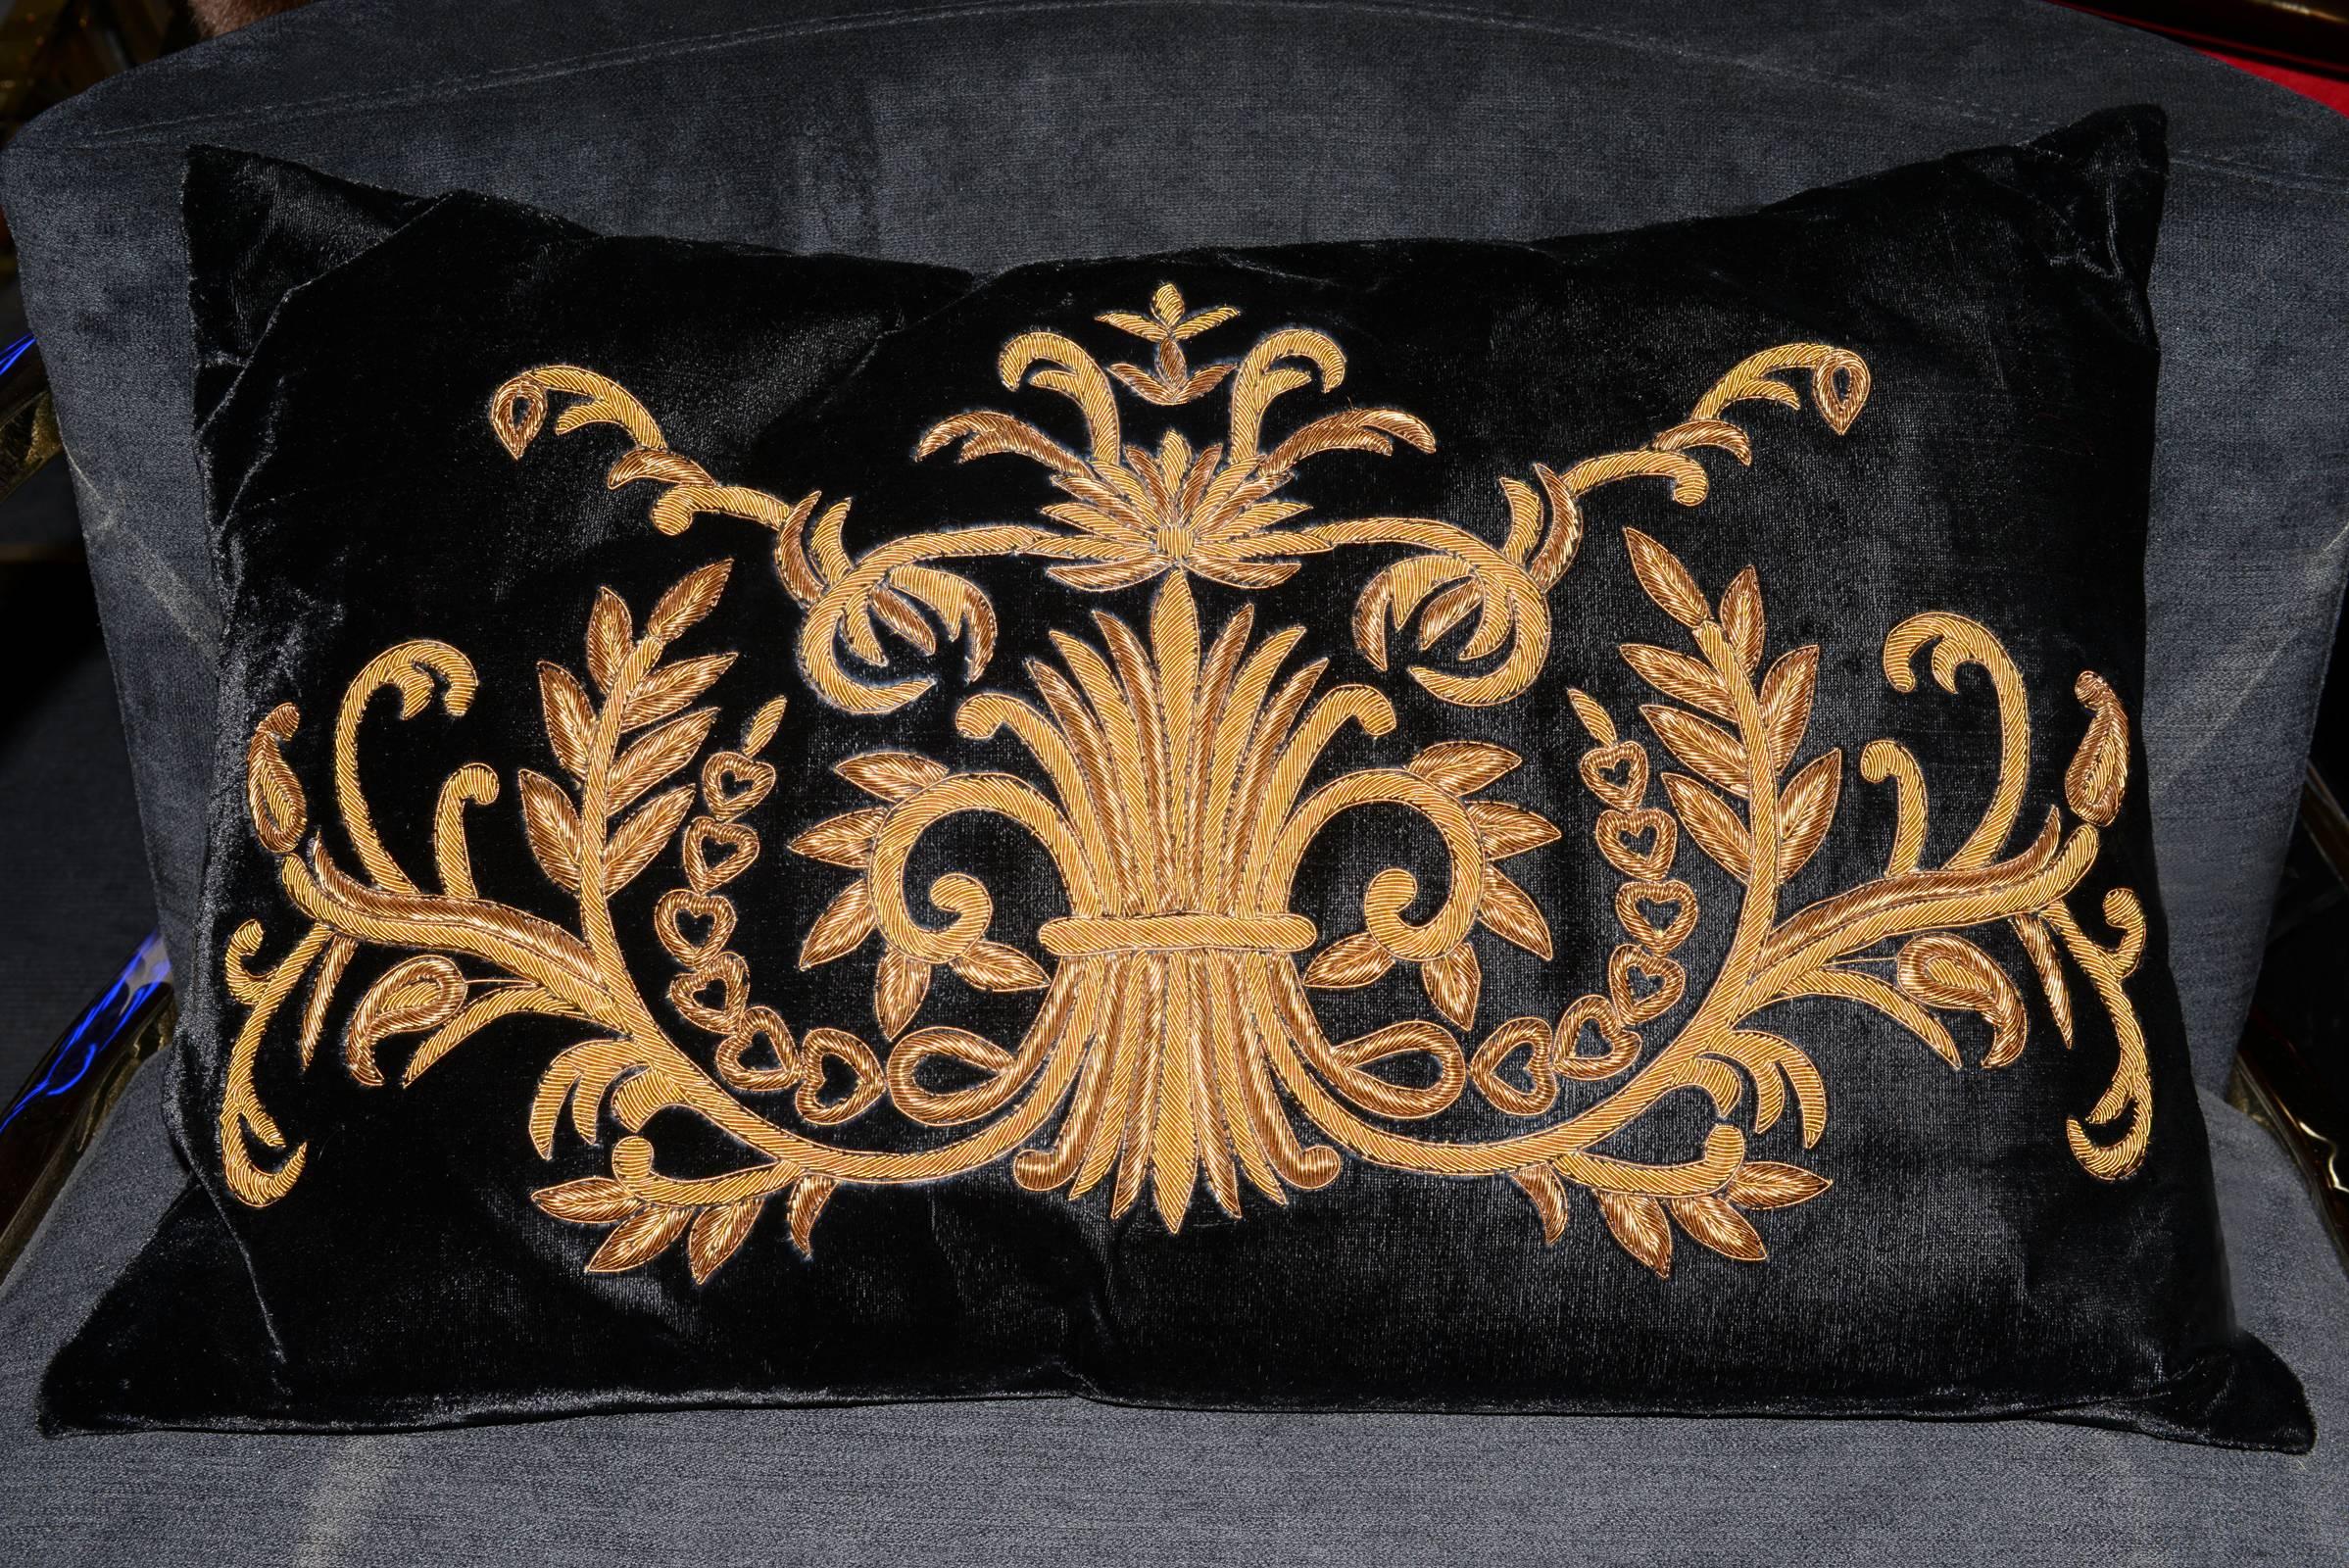 Pillow Ryad in black velvet hand
embroidered with gold thread.
